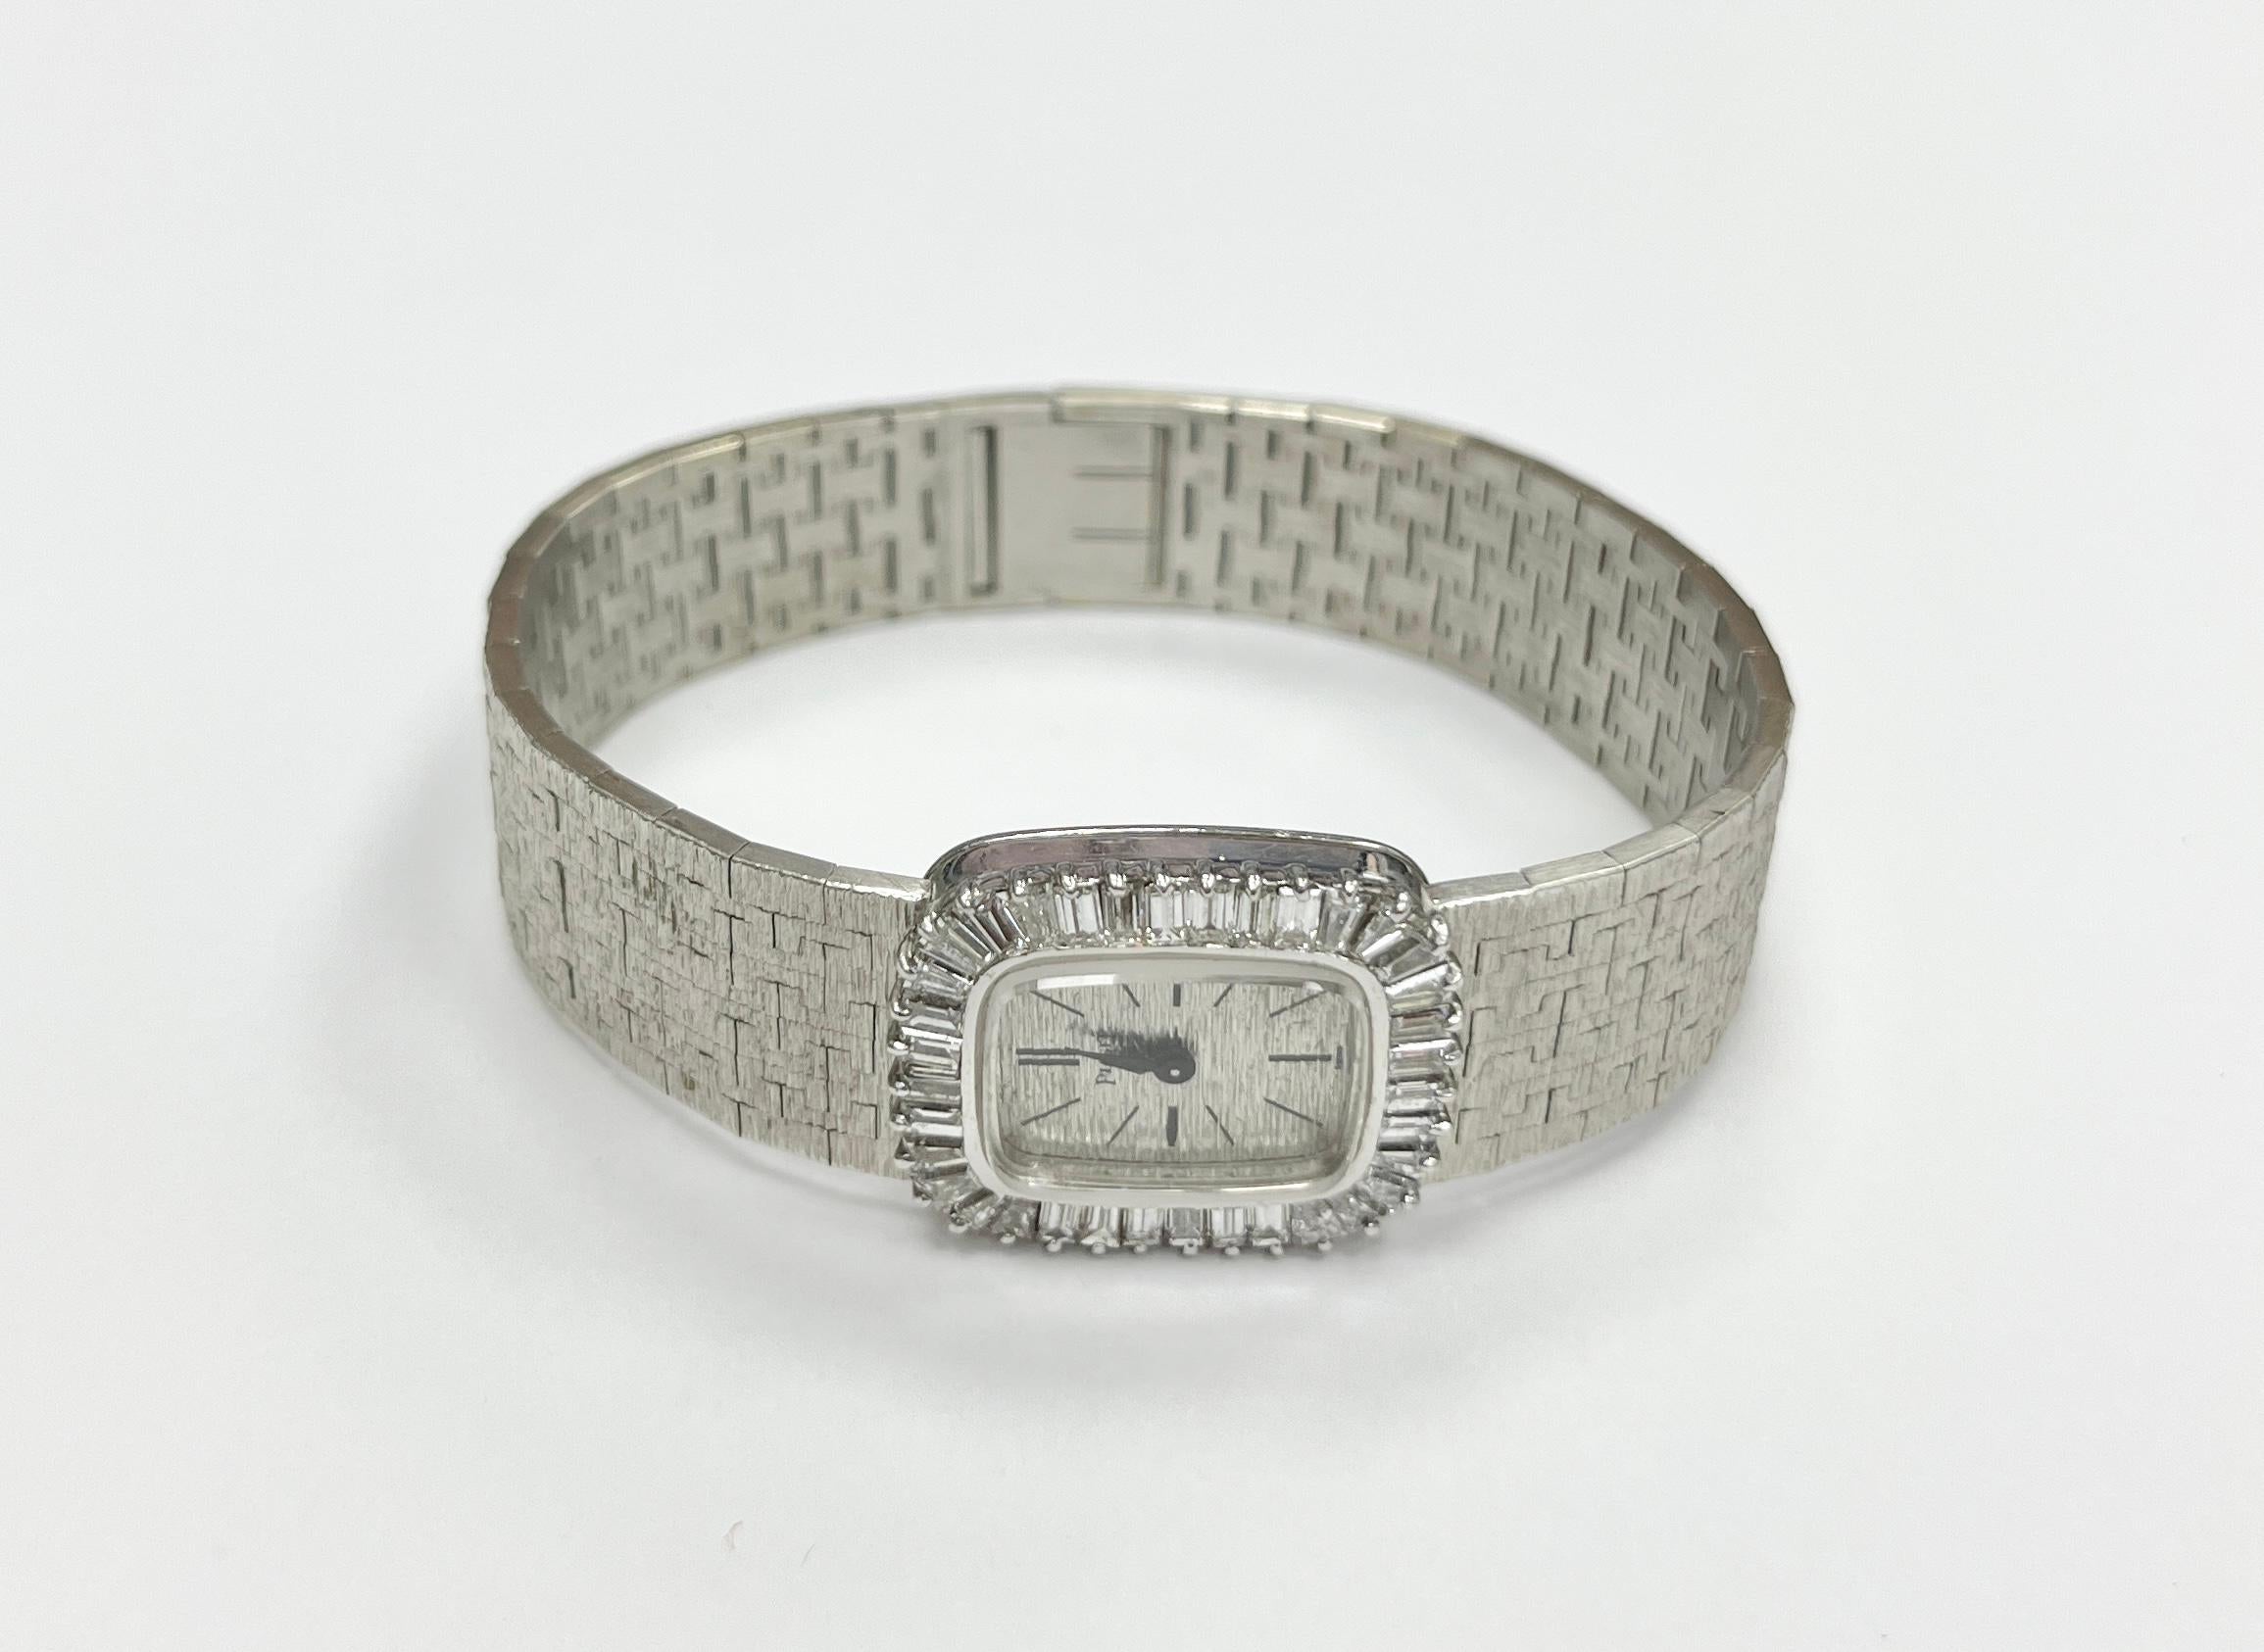 1960' PIAGET 18K white gold diamond bezel ladies watch, containing numerous straight and tapered baquette diamonds, 35 dias approx 1.10 cts, textured silvered dial, manual wind movement, integrated textured mesh link bracelet, fold over clasp
6 1/4